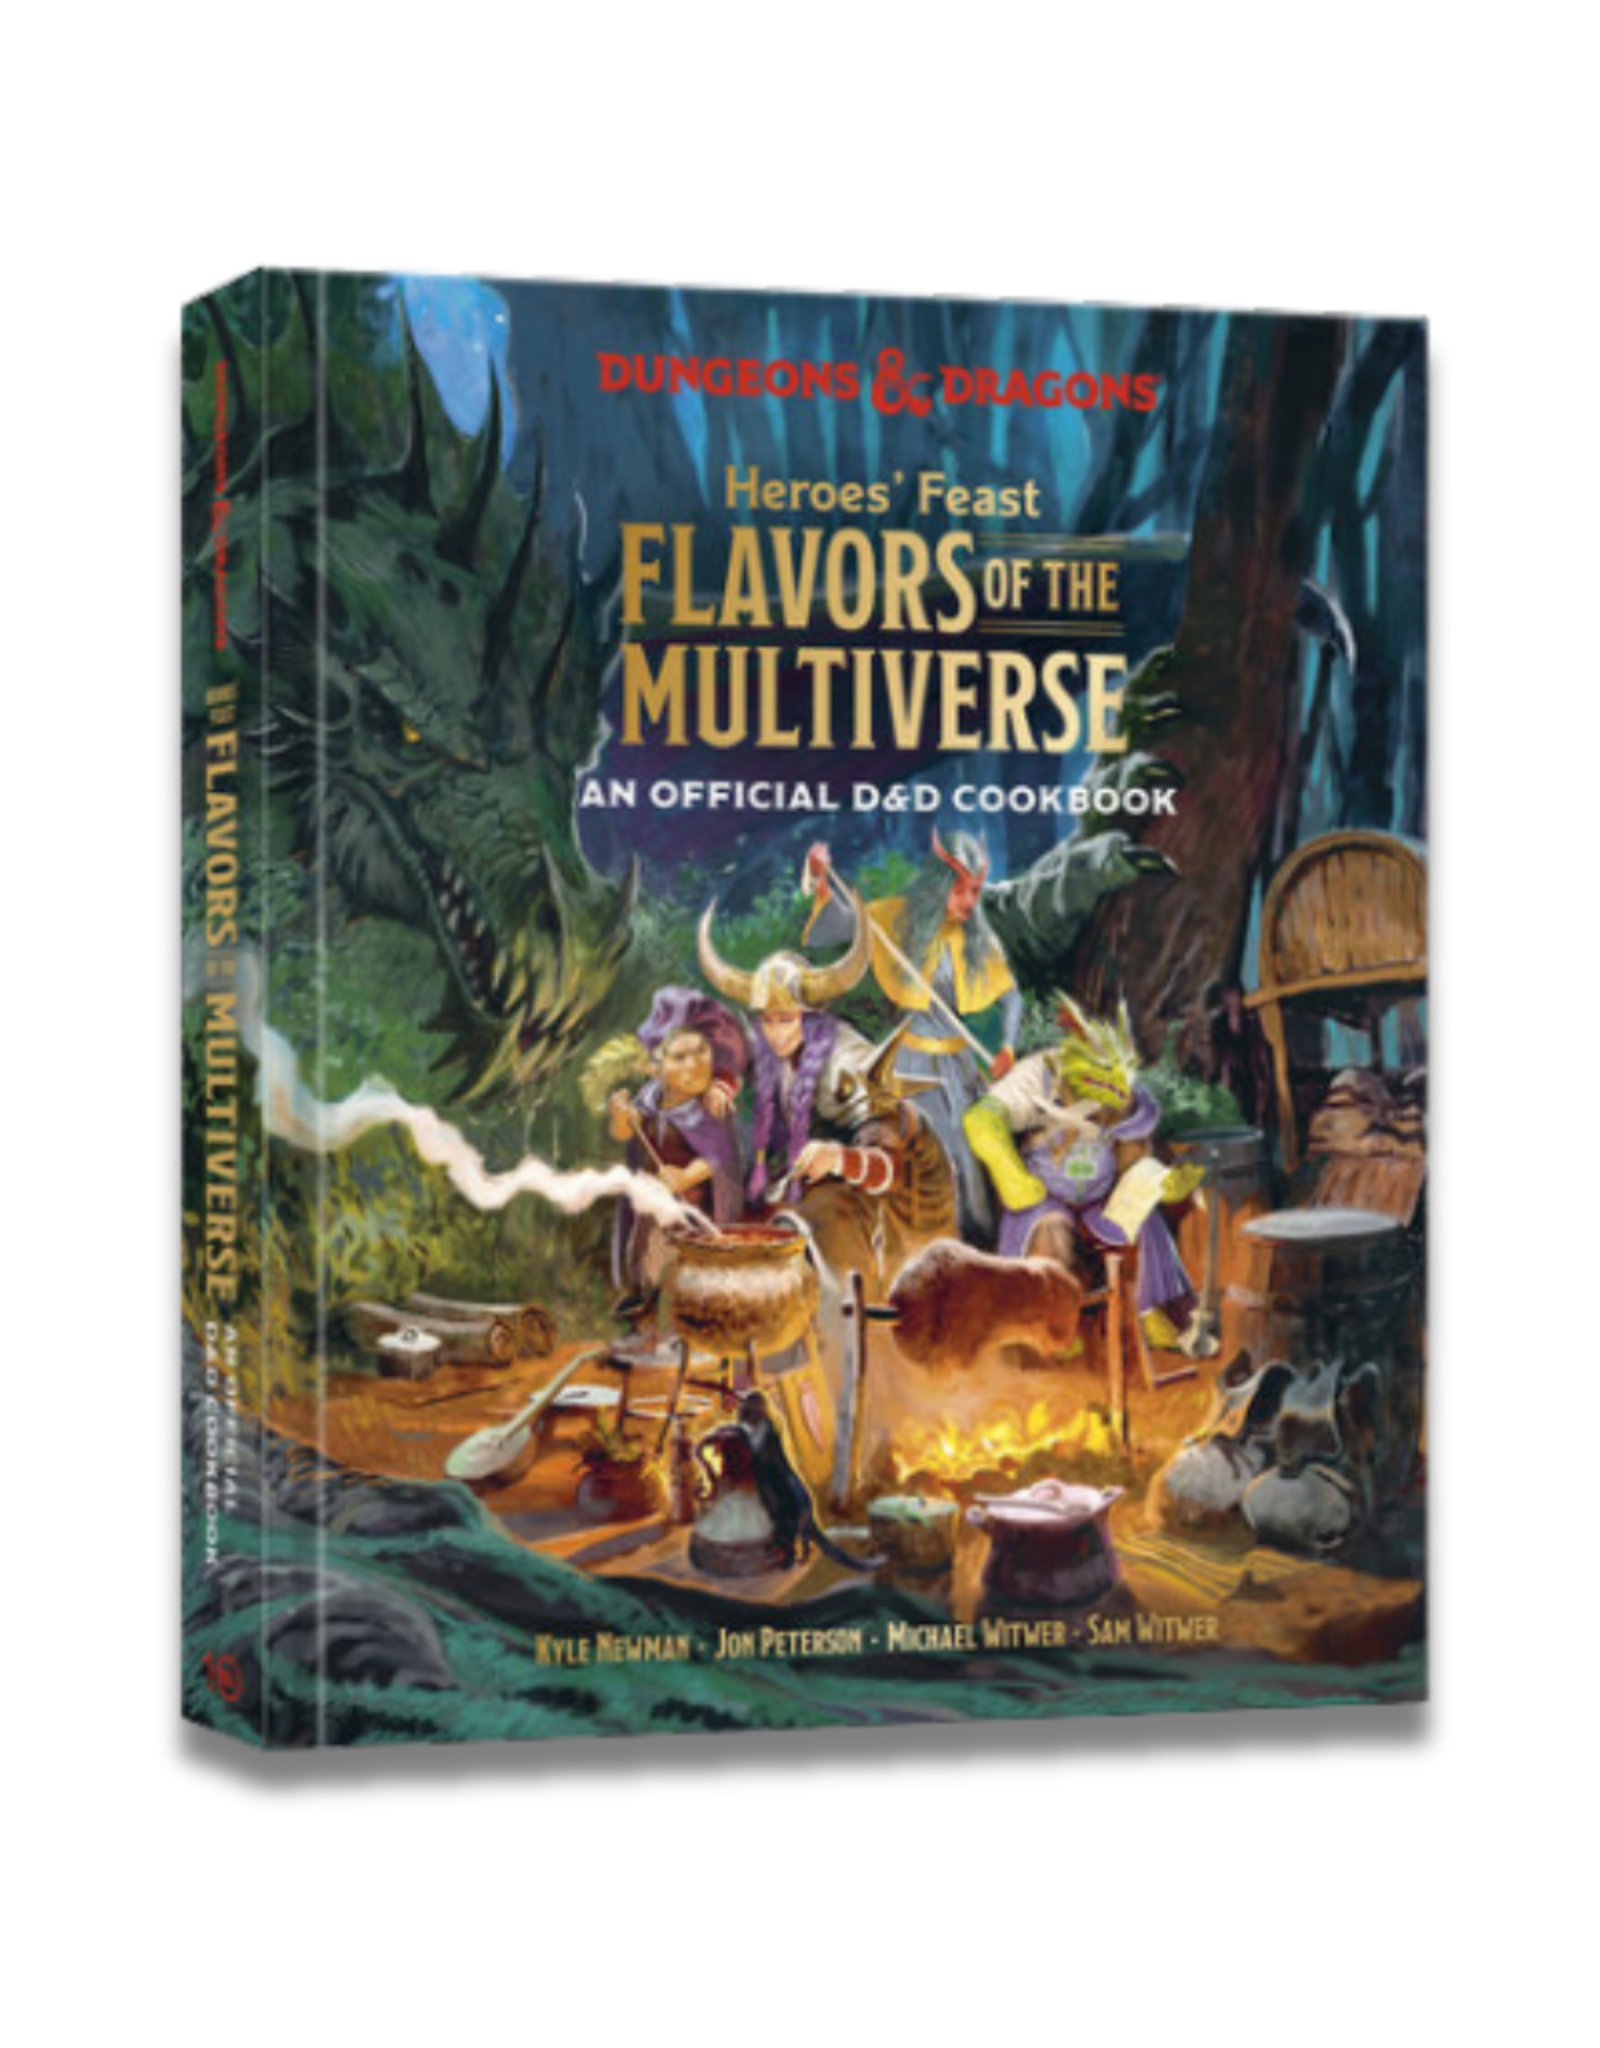 Heroes' Feast Flavors of the Multiverse: Dungeons & Dragons Cookbook